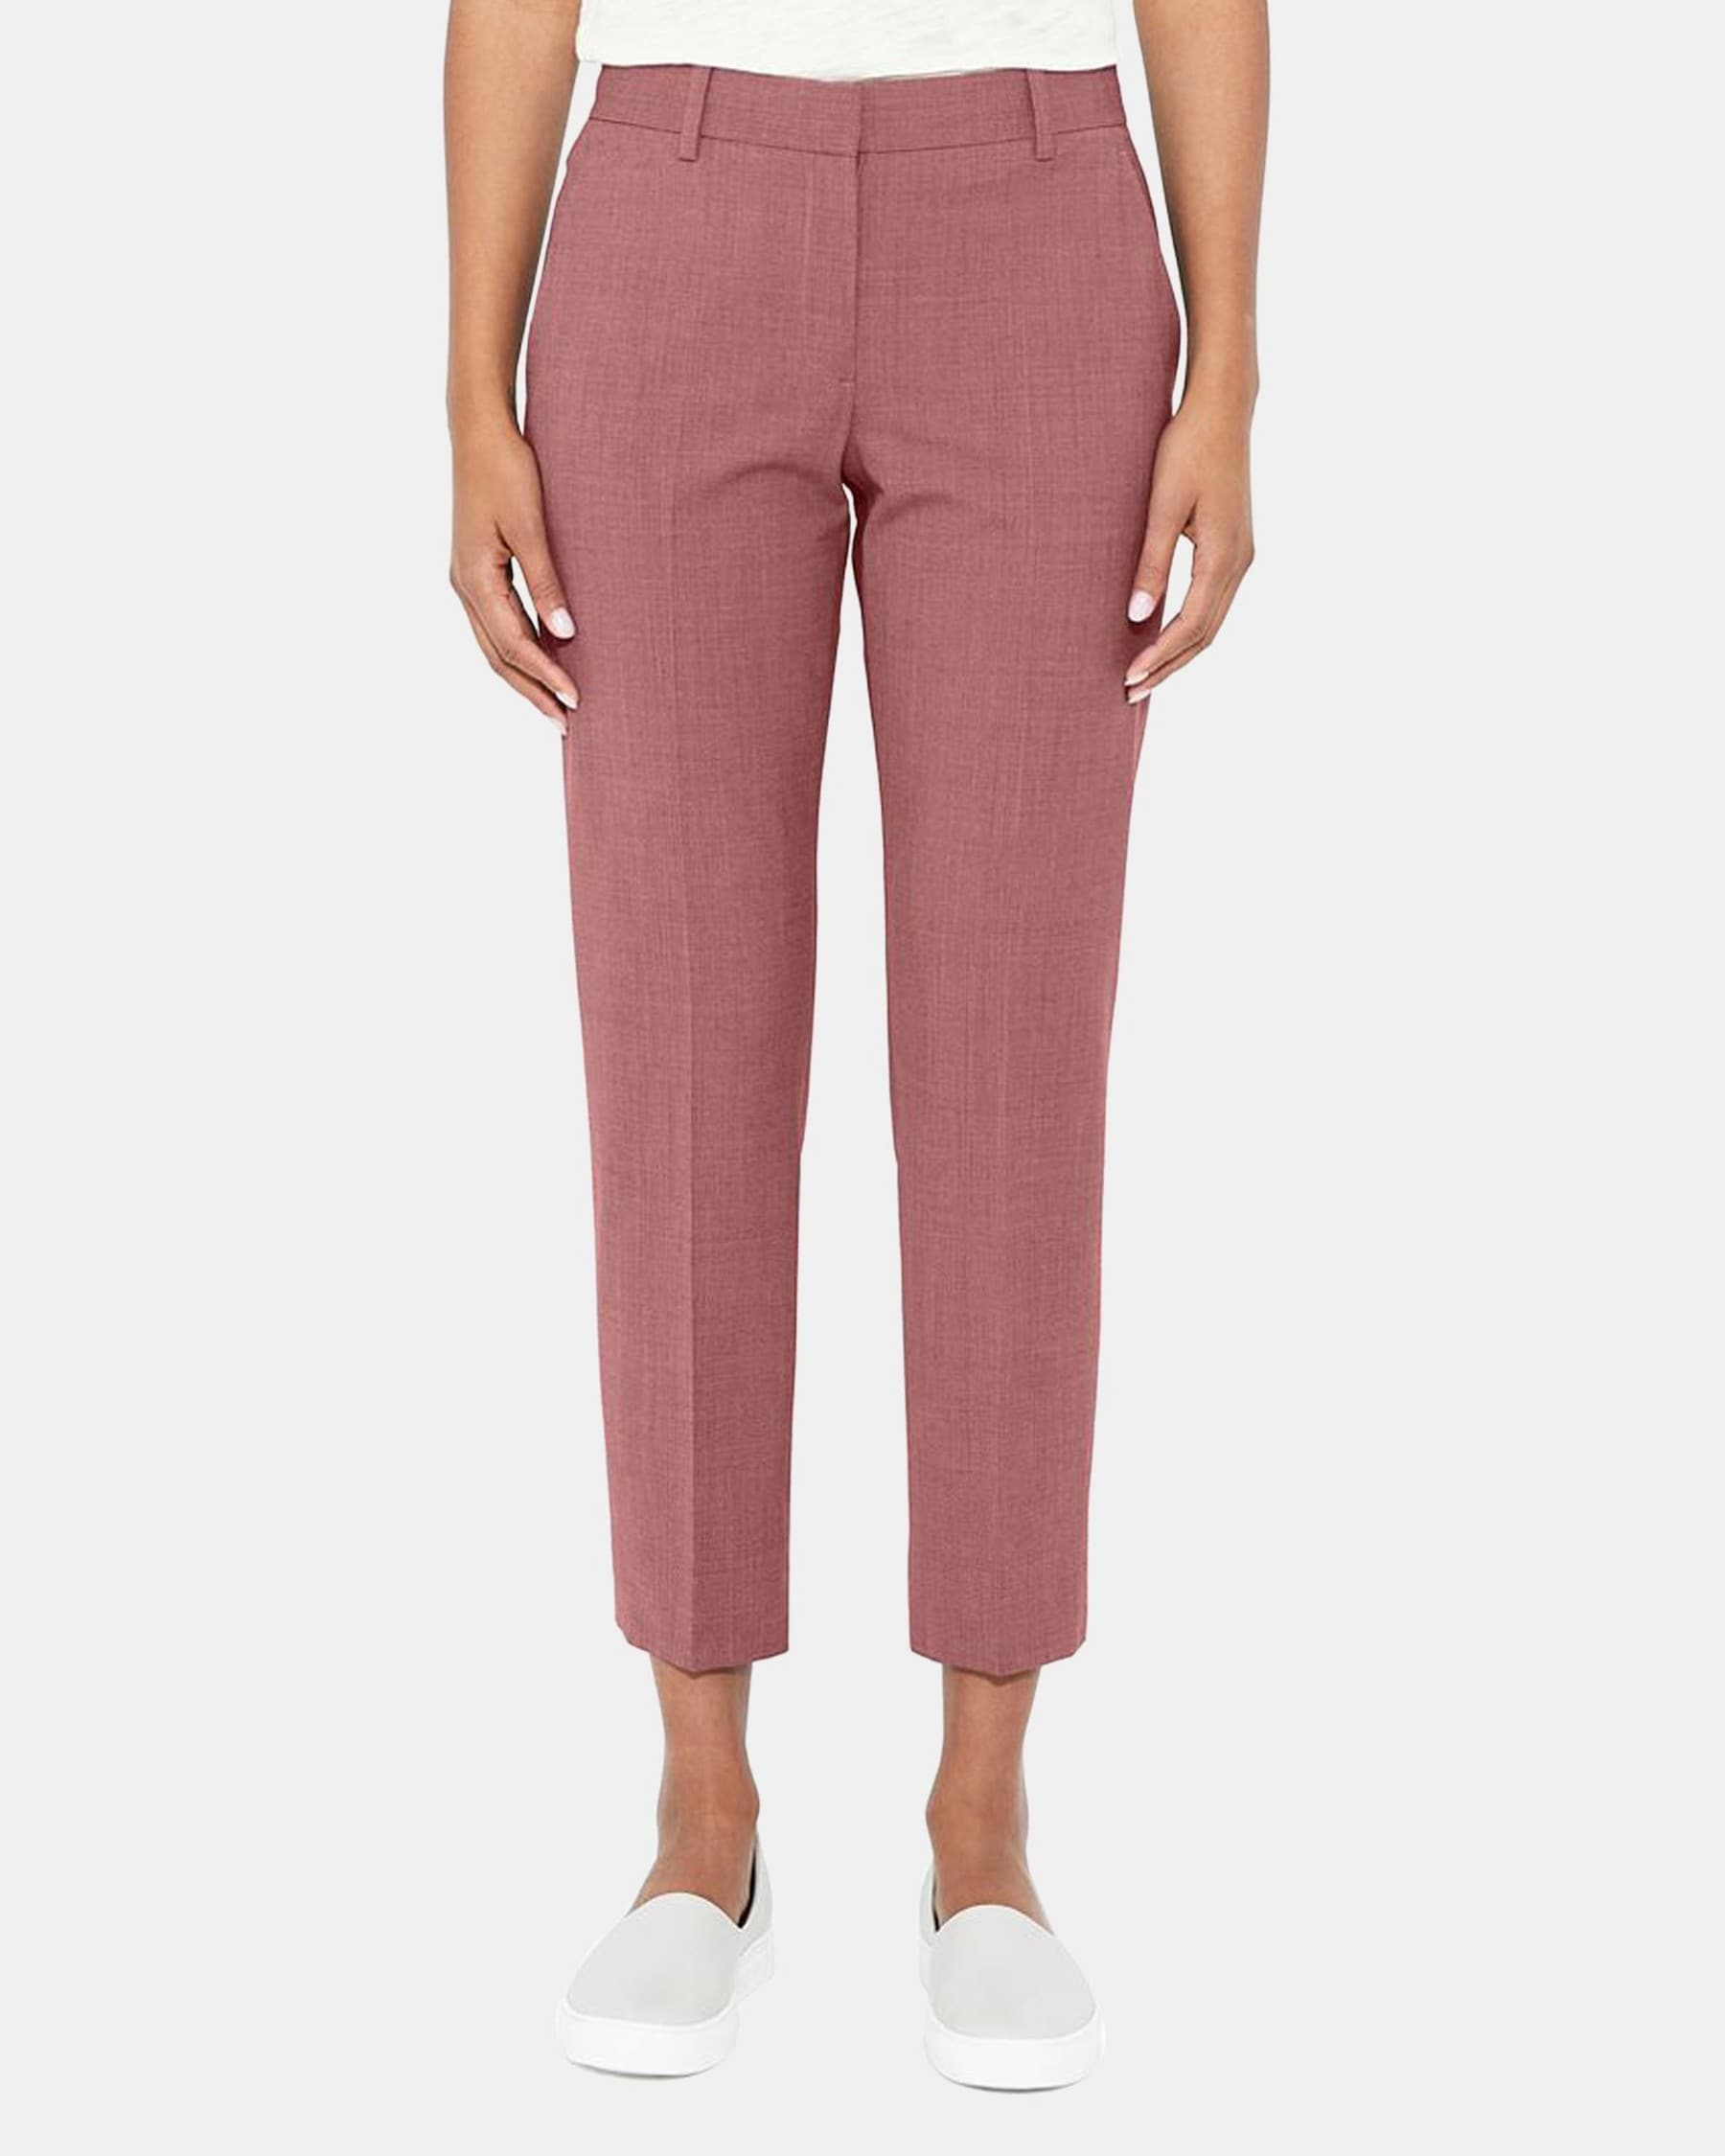 Theory Slim Cropped Pant in Stretch Wool